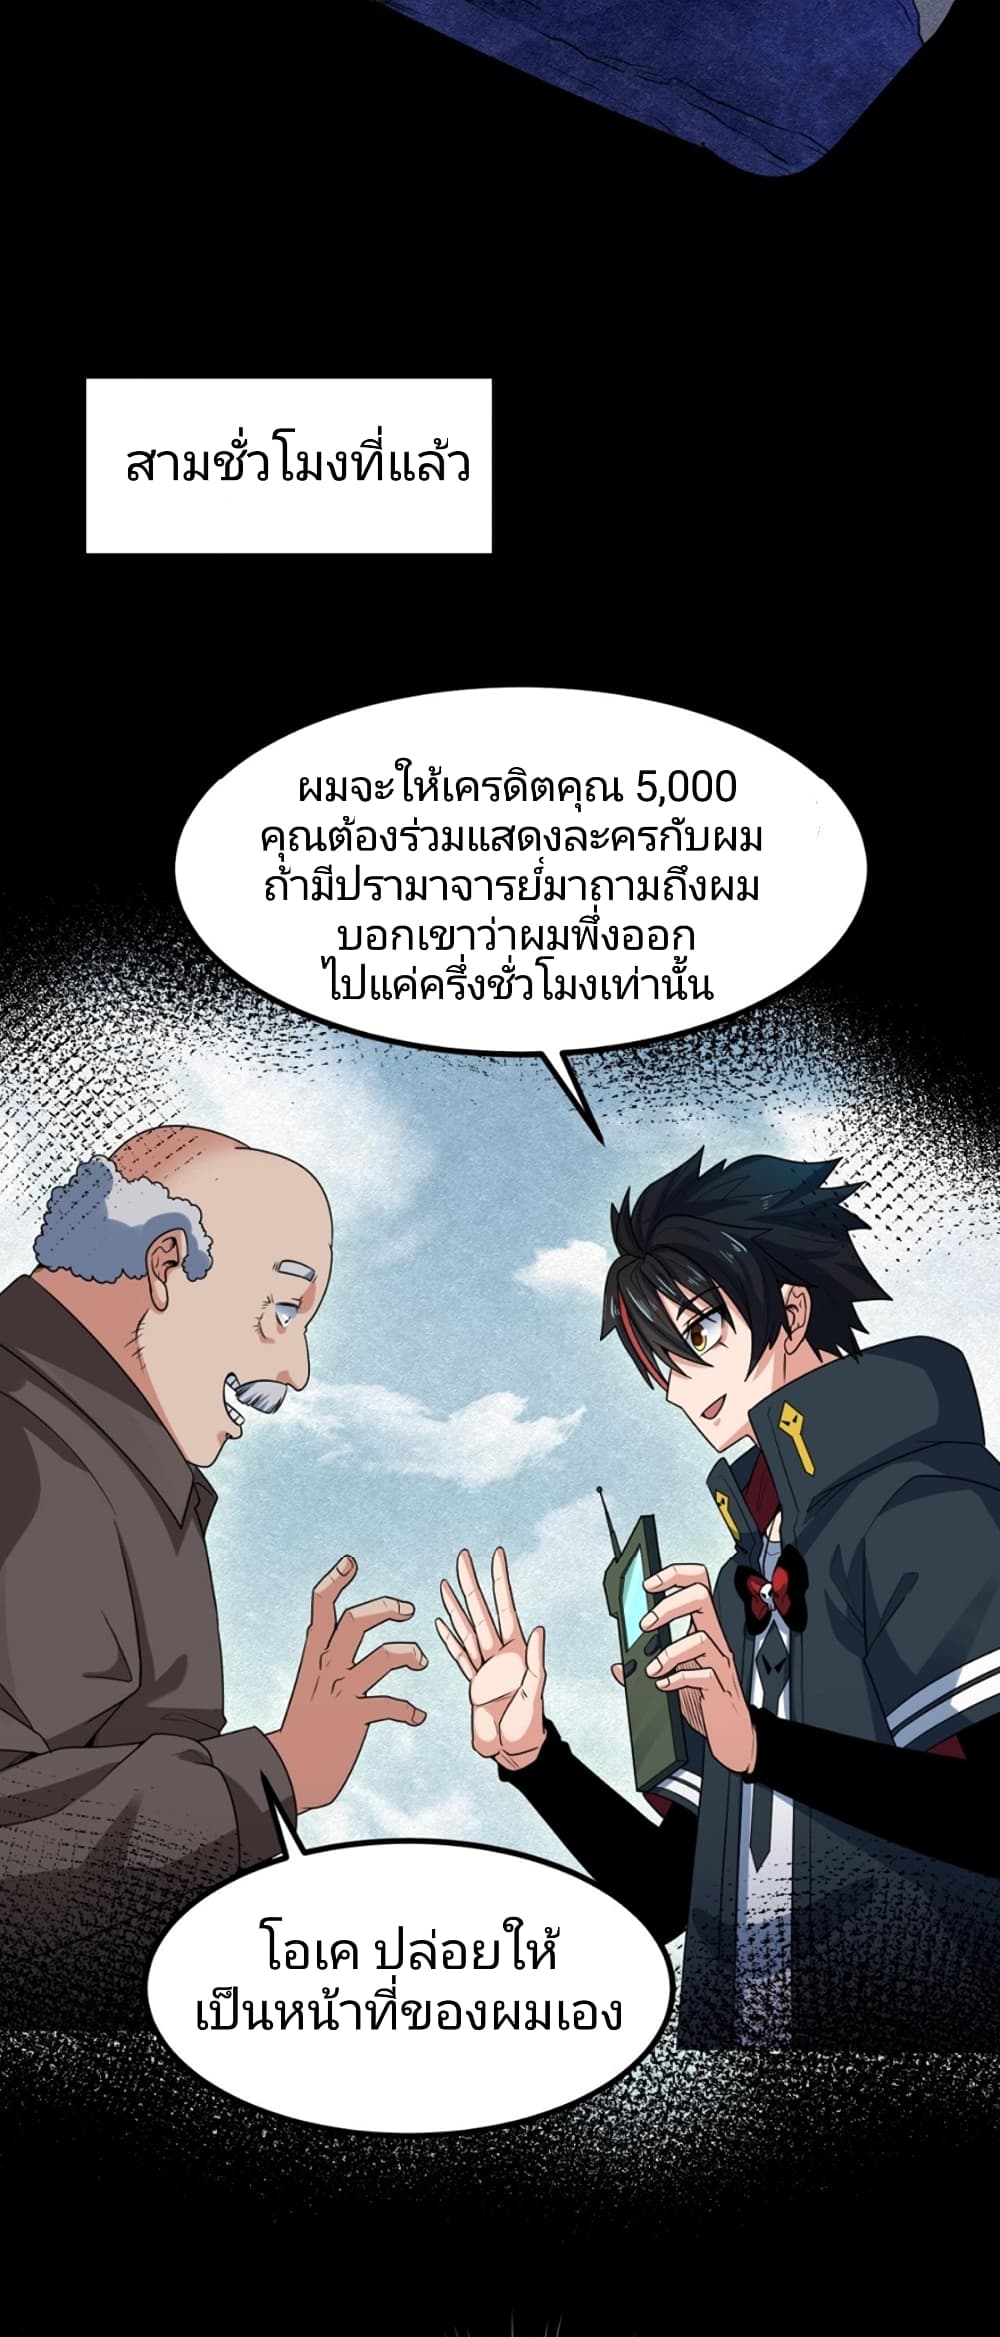 The Age of Ghost Spirits à¸à¸­à¸à¸à¸µà¹ 9 (43)